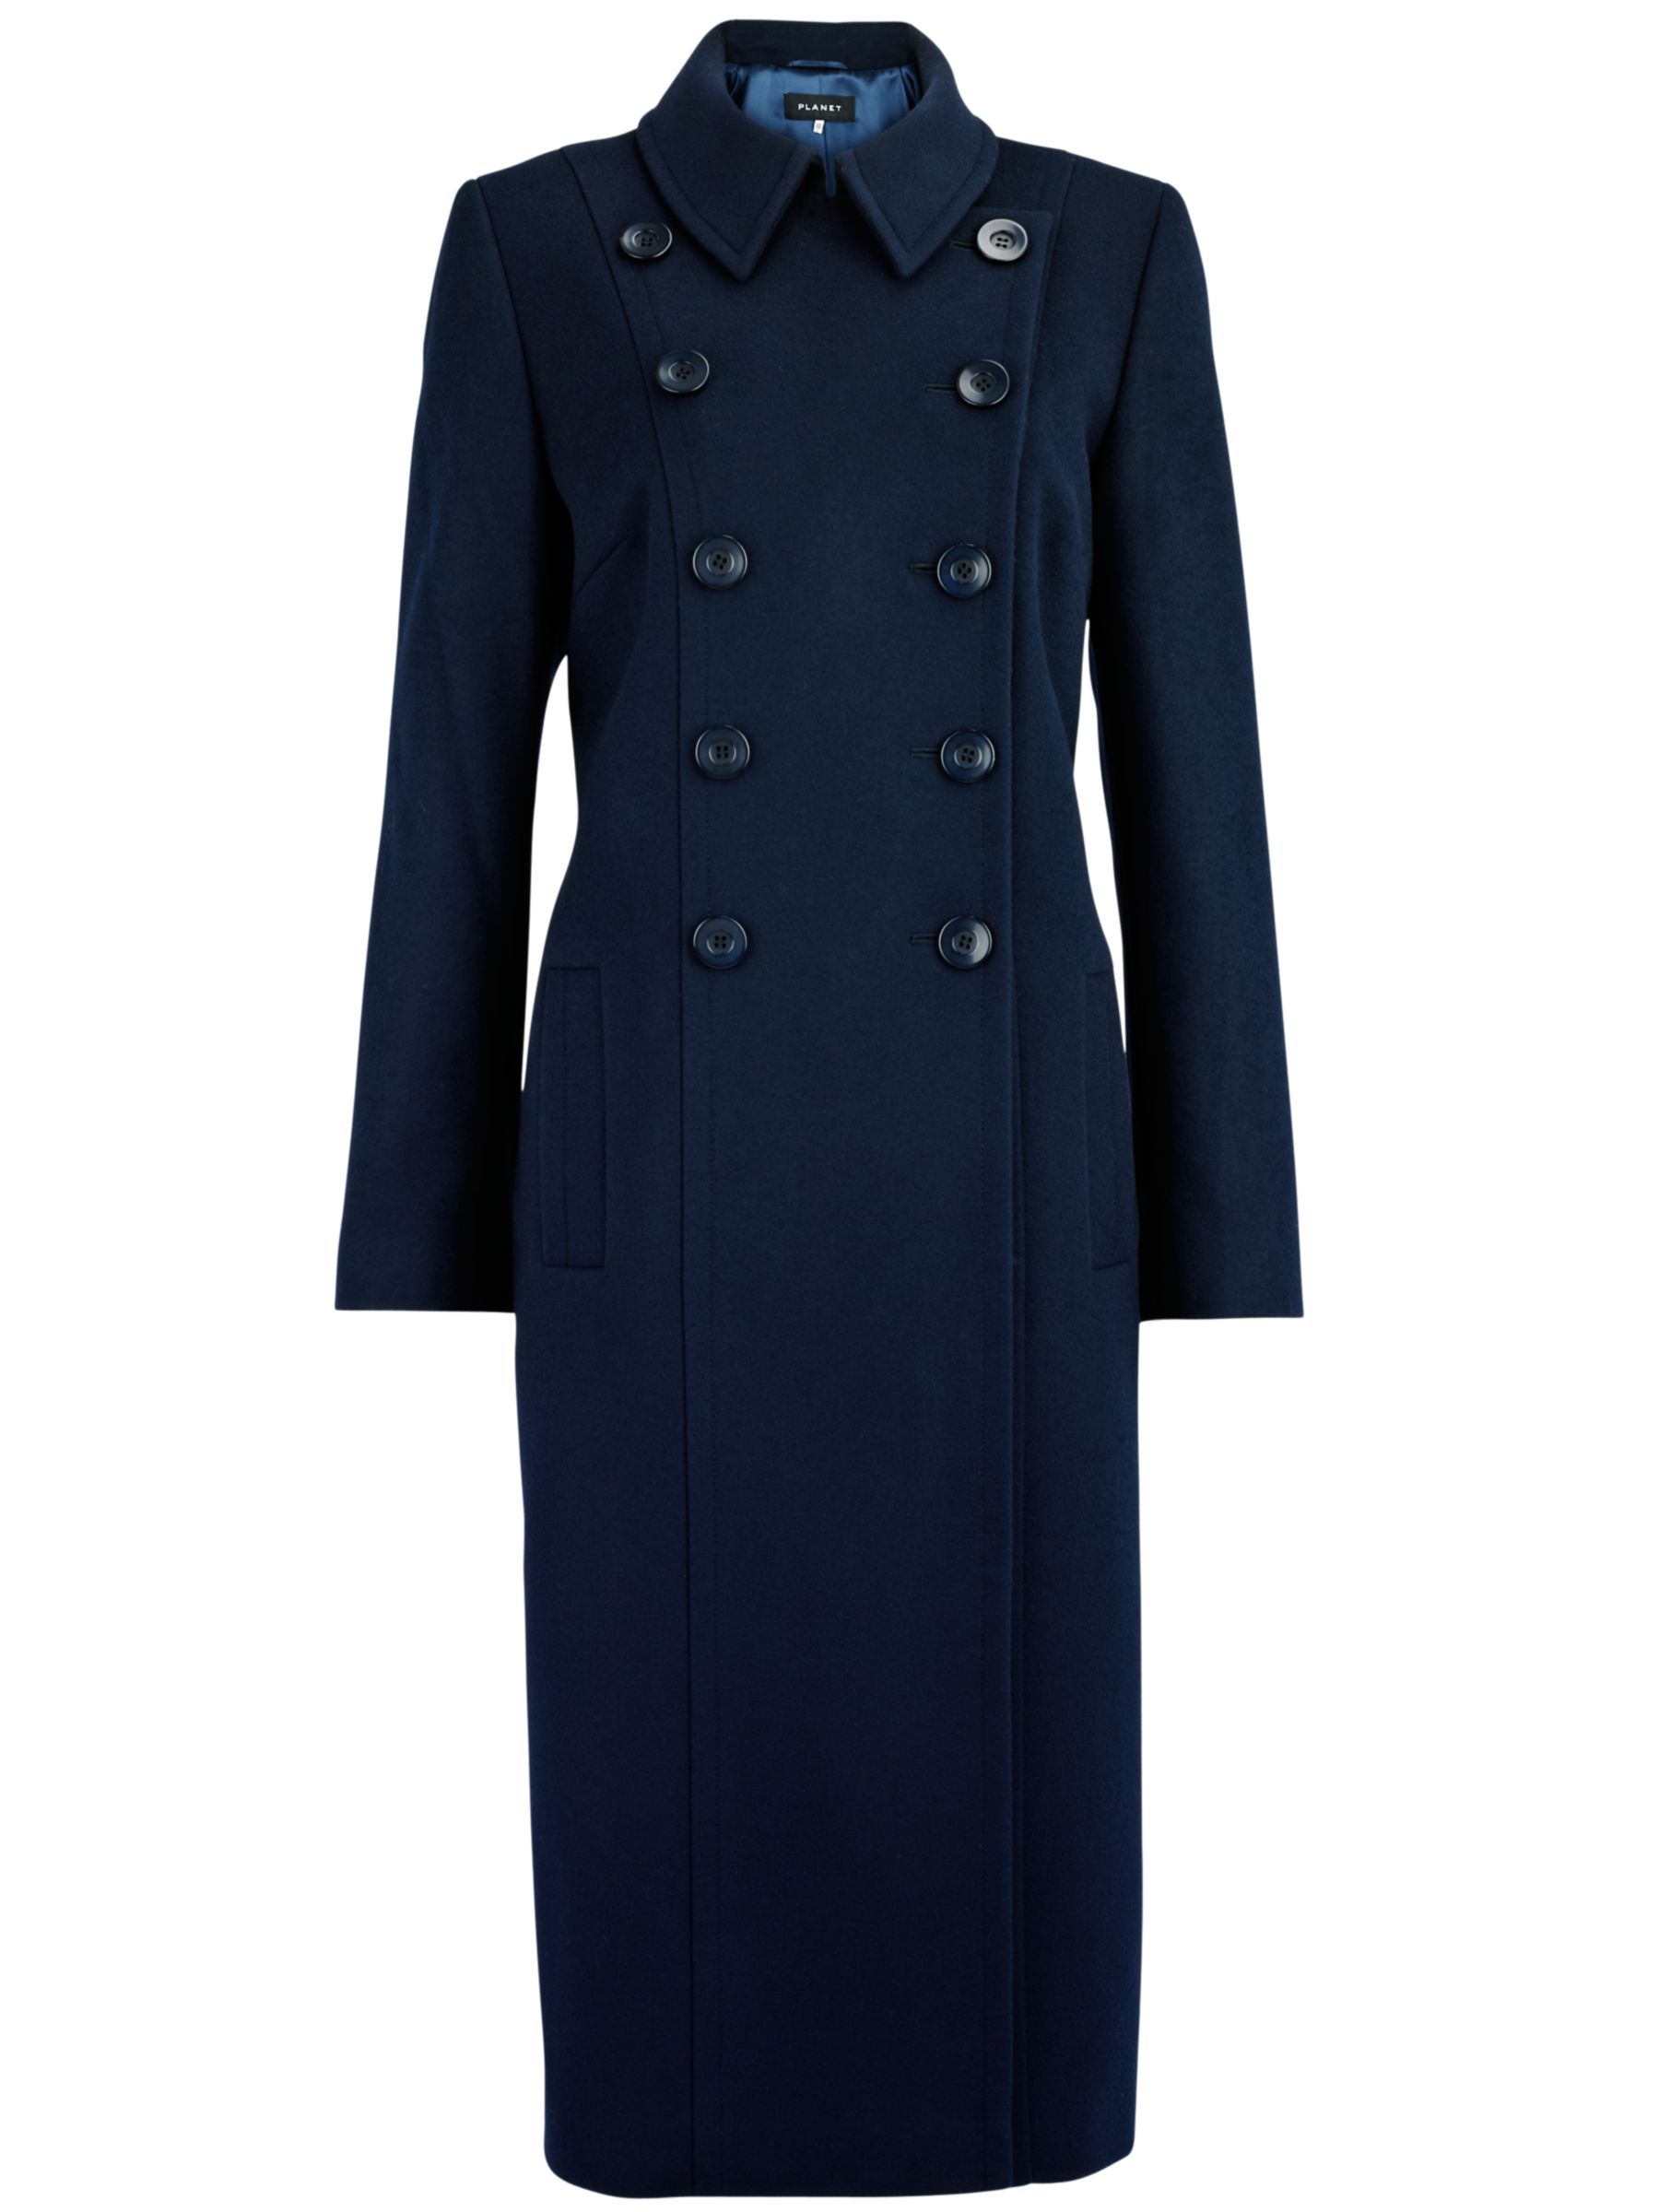 Planet Military Long Length Coat, Navy blue at JohnLewis